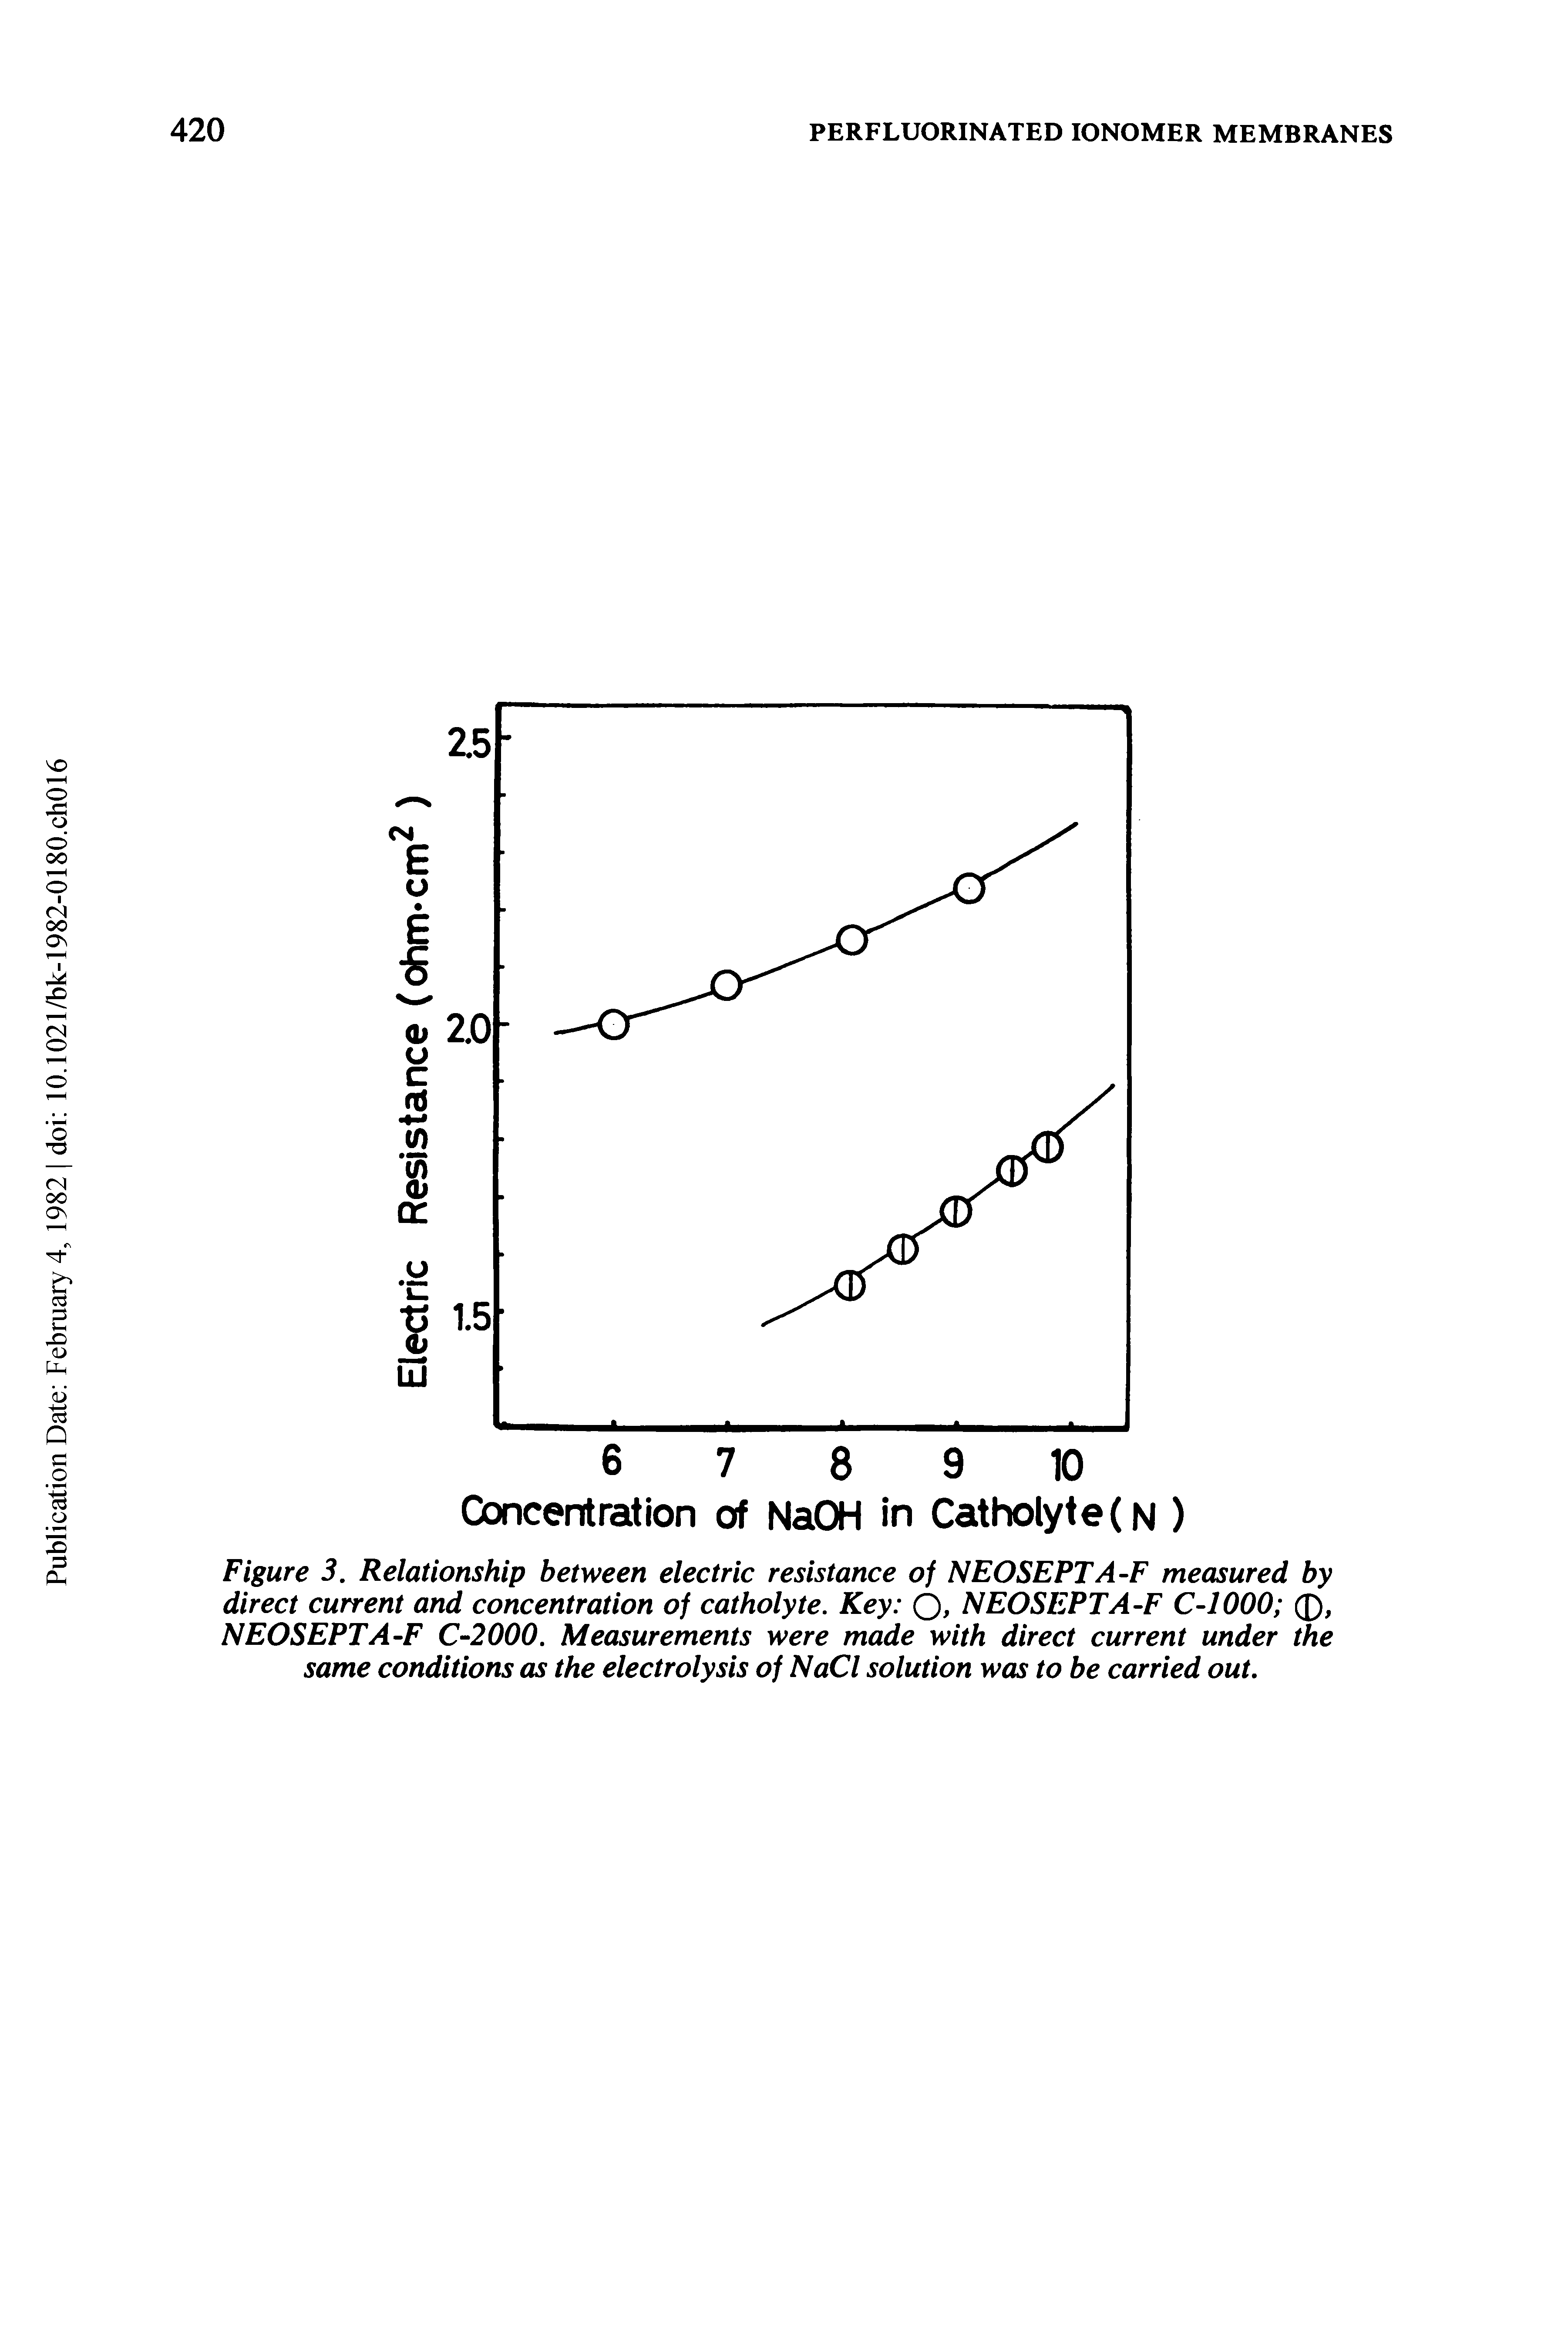 Figure 3. Relationship between electric resistance of NEOSEPTA-F measured by direct current and concentration of catholyte. Key Q, NEOSEPT A-F C-1000 0, NEOSEPT A-F C-2000. Measurements were made with direct current under the same conditions as the electrolysis of NaCl solution was to be carried out.